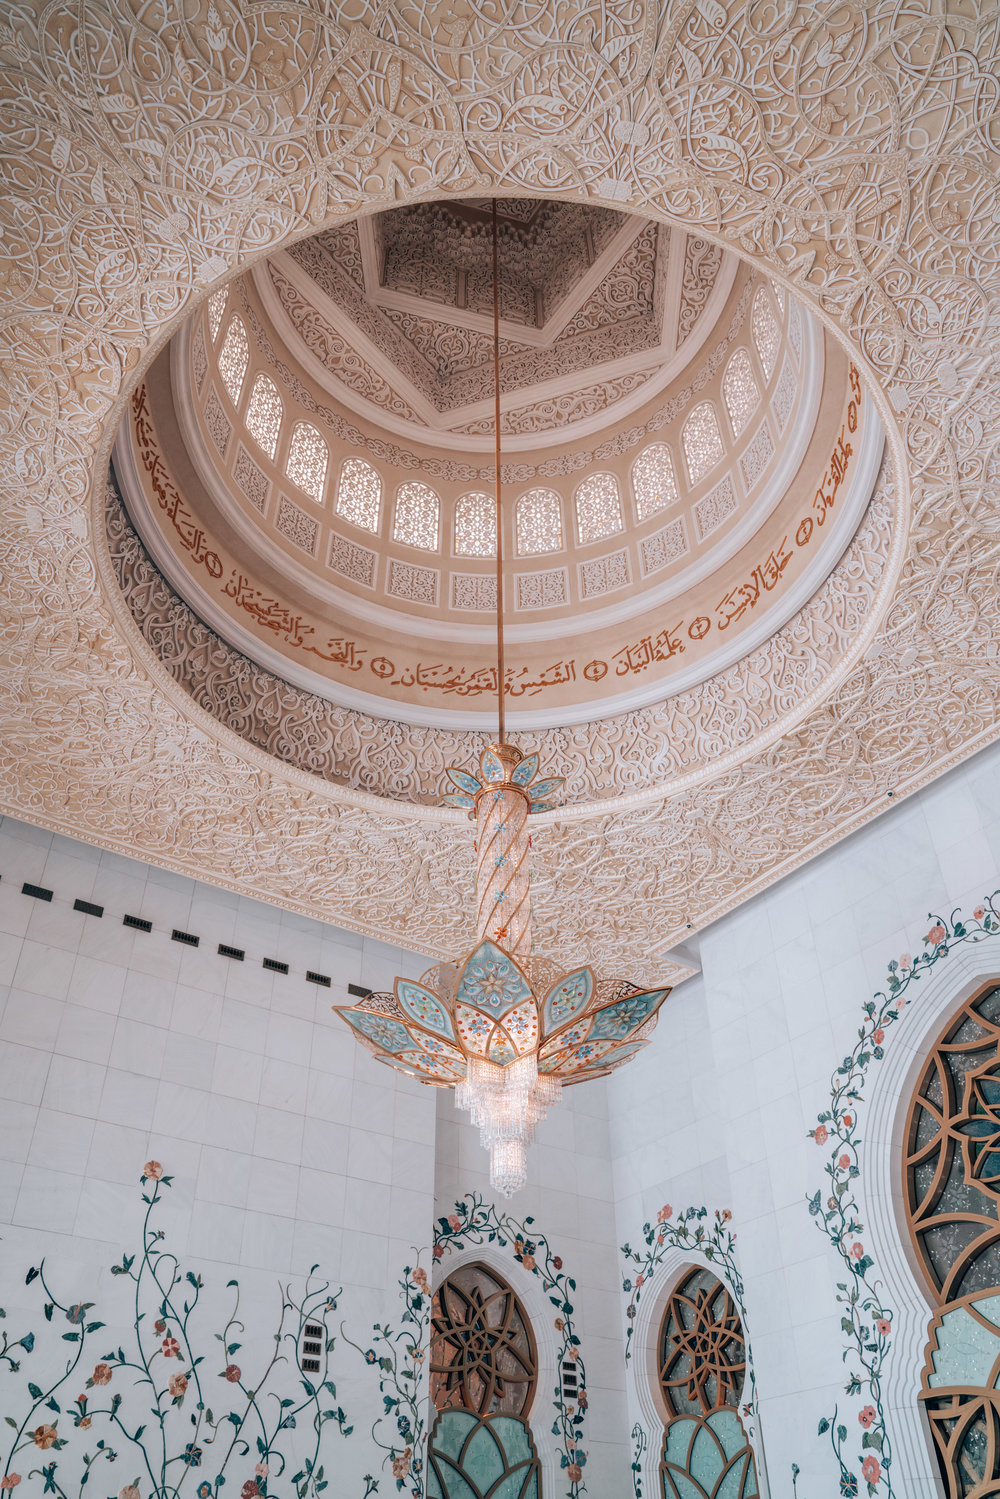 10 Things You Need to Know Before Visiting the Sheikh Zayed Mosque in Abu Dhabi